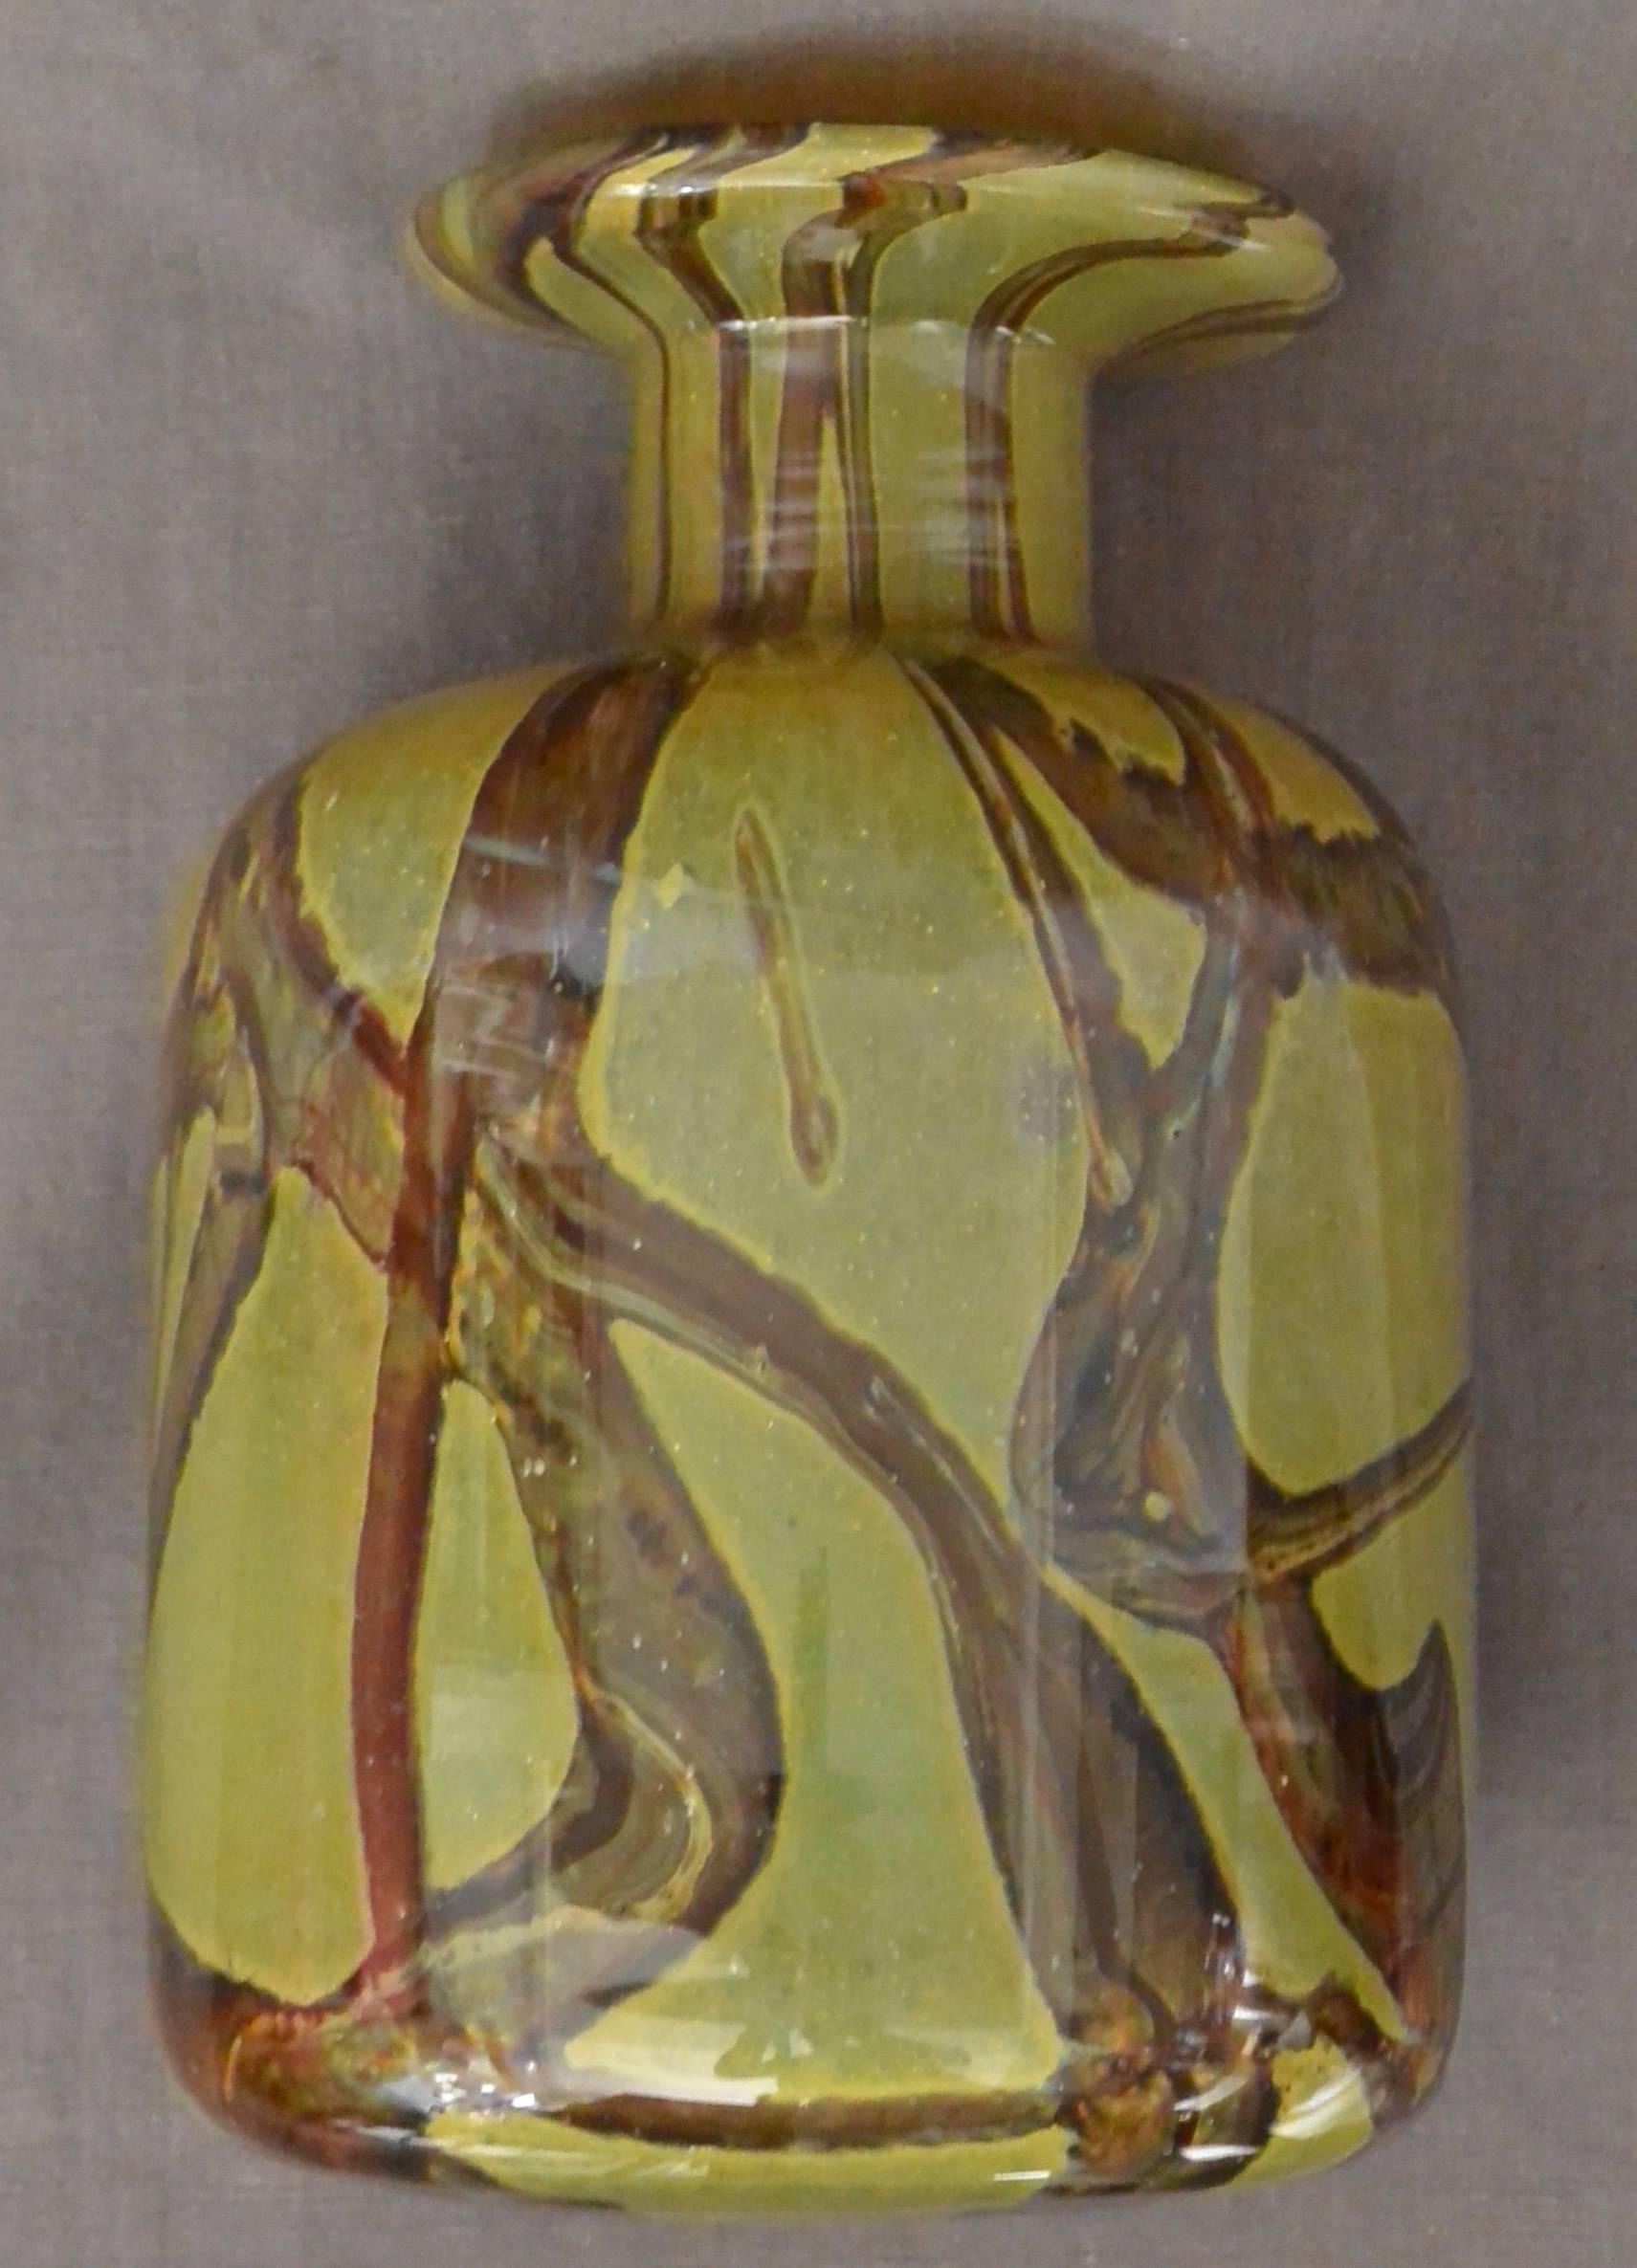 Vintage Murano chestnut and acid green glass vase, Italy, circa 1950s.
Dimensions: 5.5